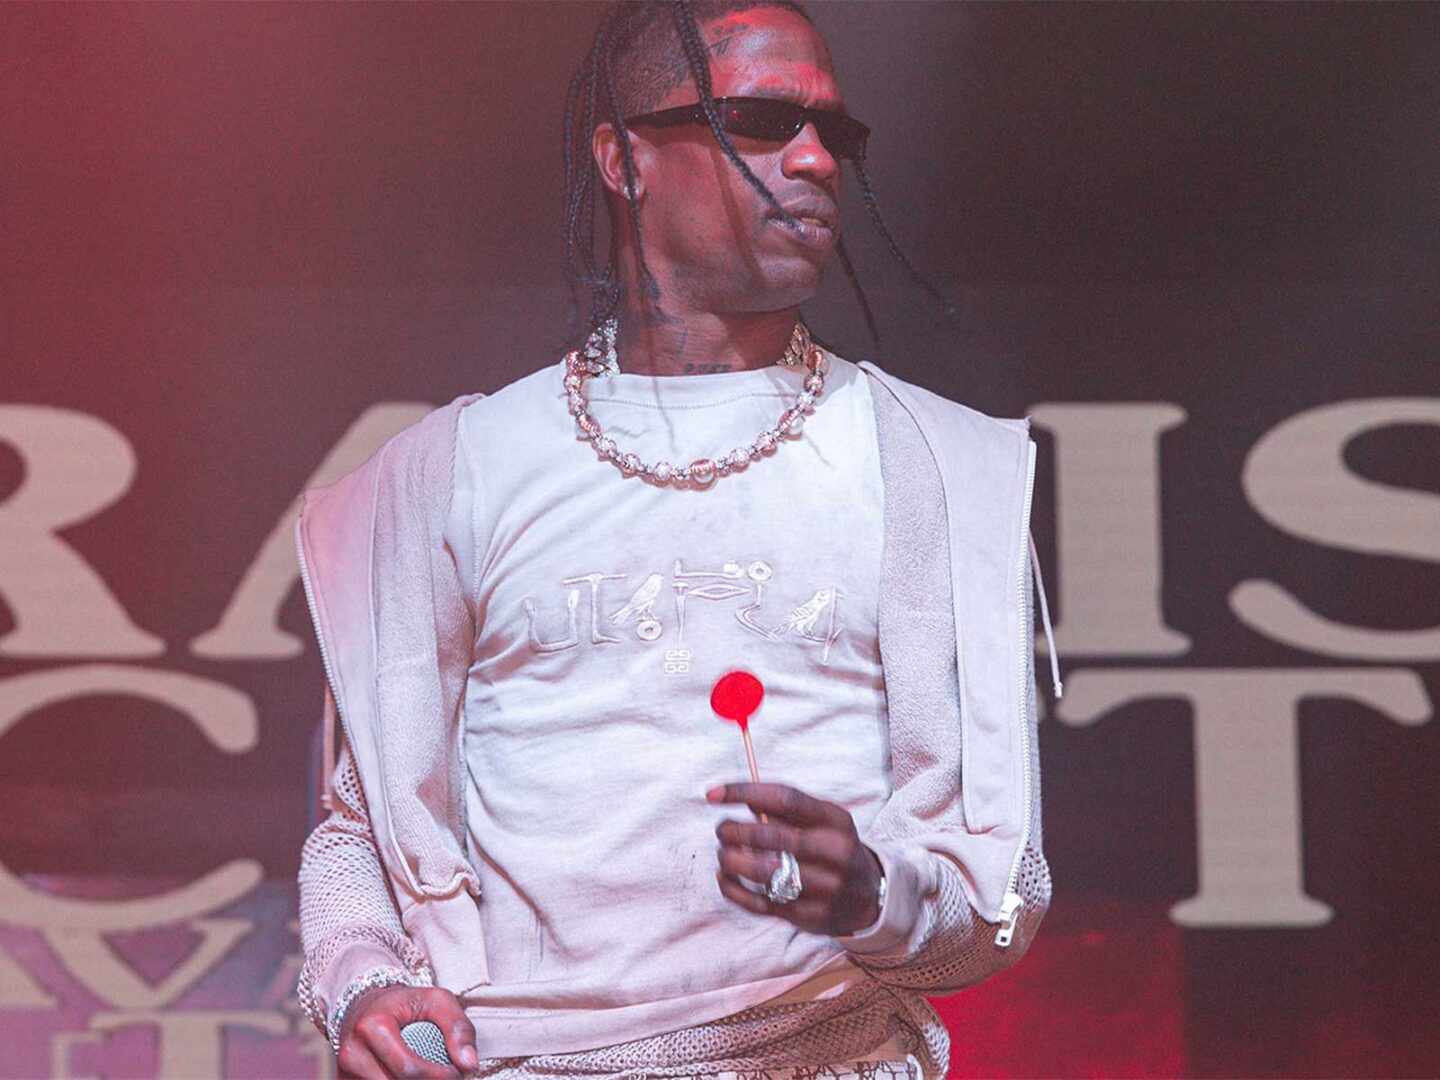 Travis Scott could launch merchandising collection with Givenchy